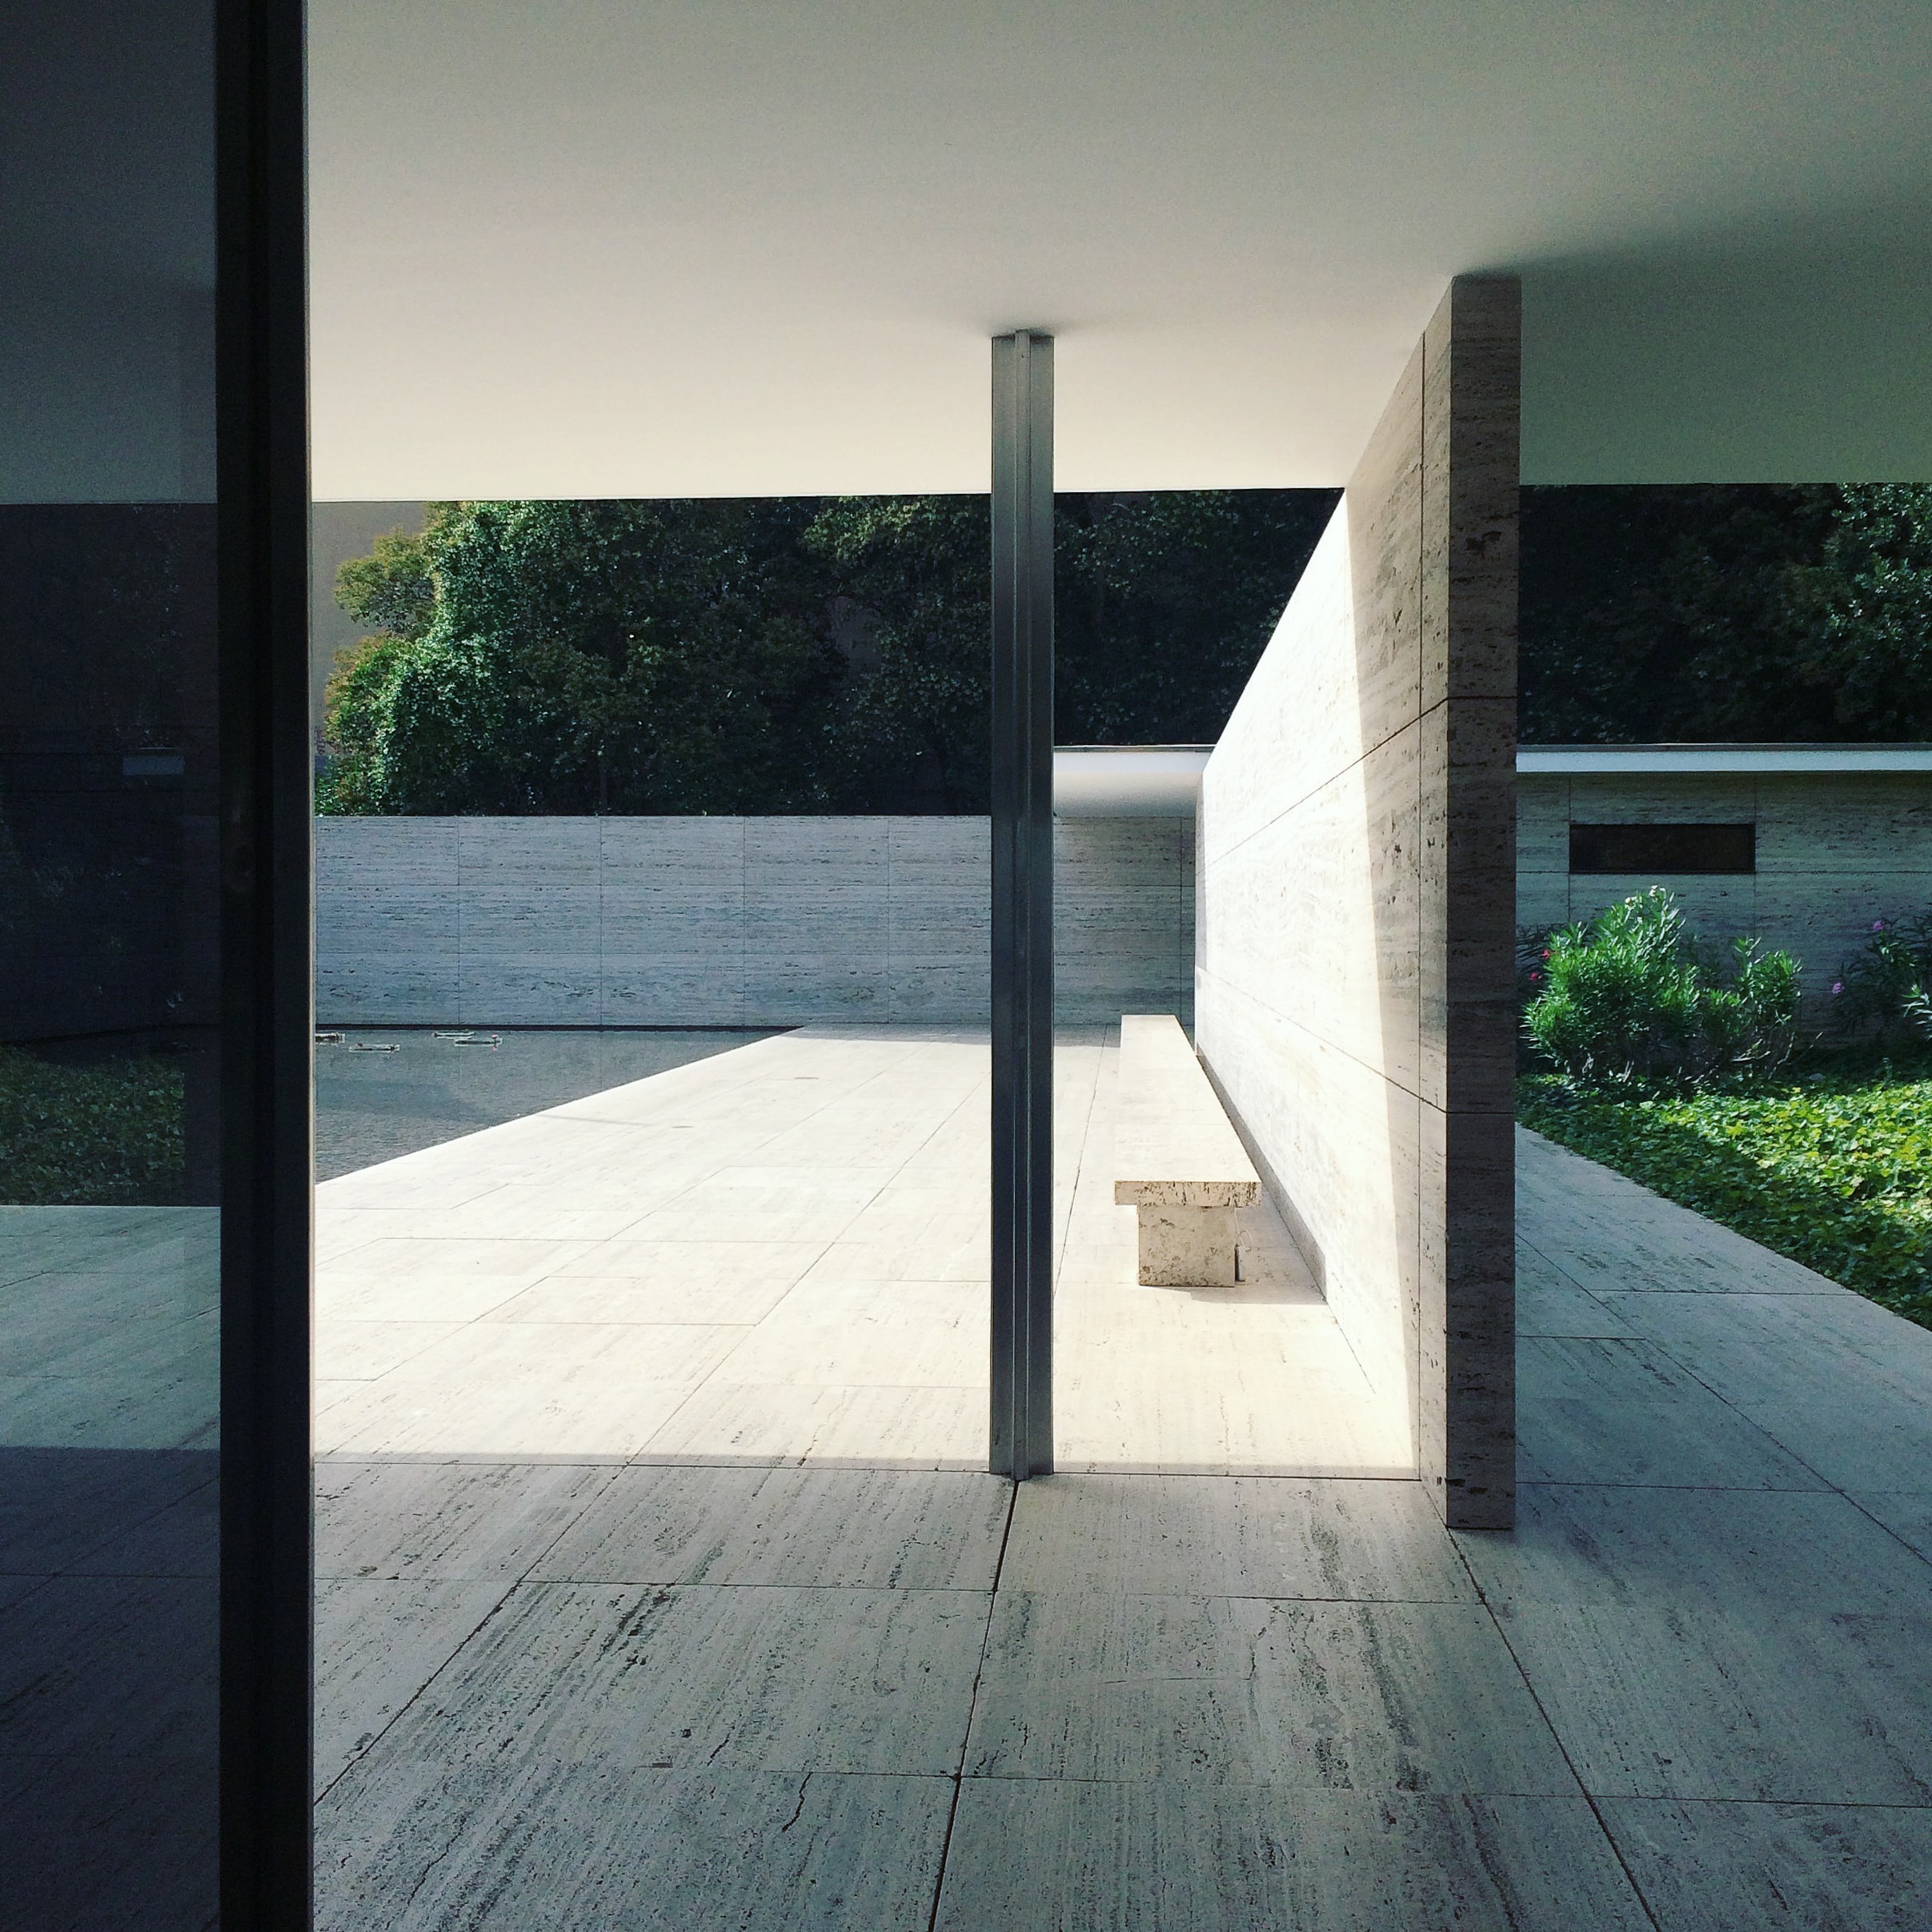 Architecture and minimalism, the visual harmony of the ‘less is more’ philosophy